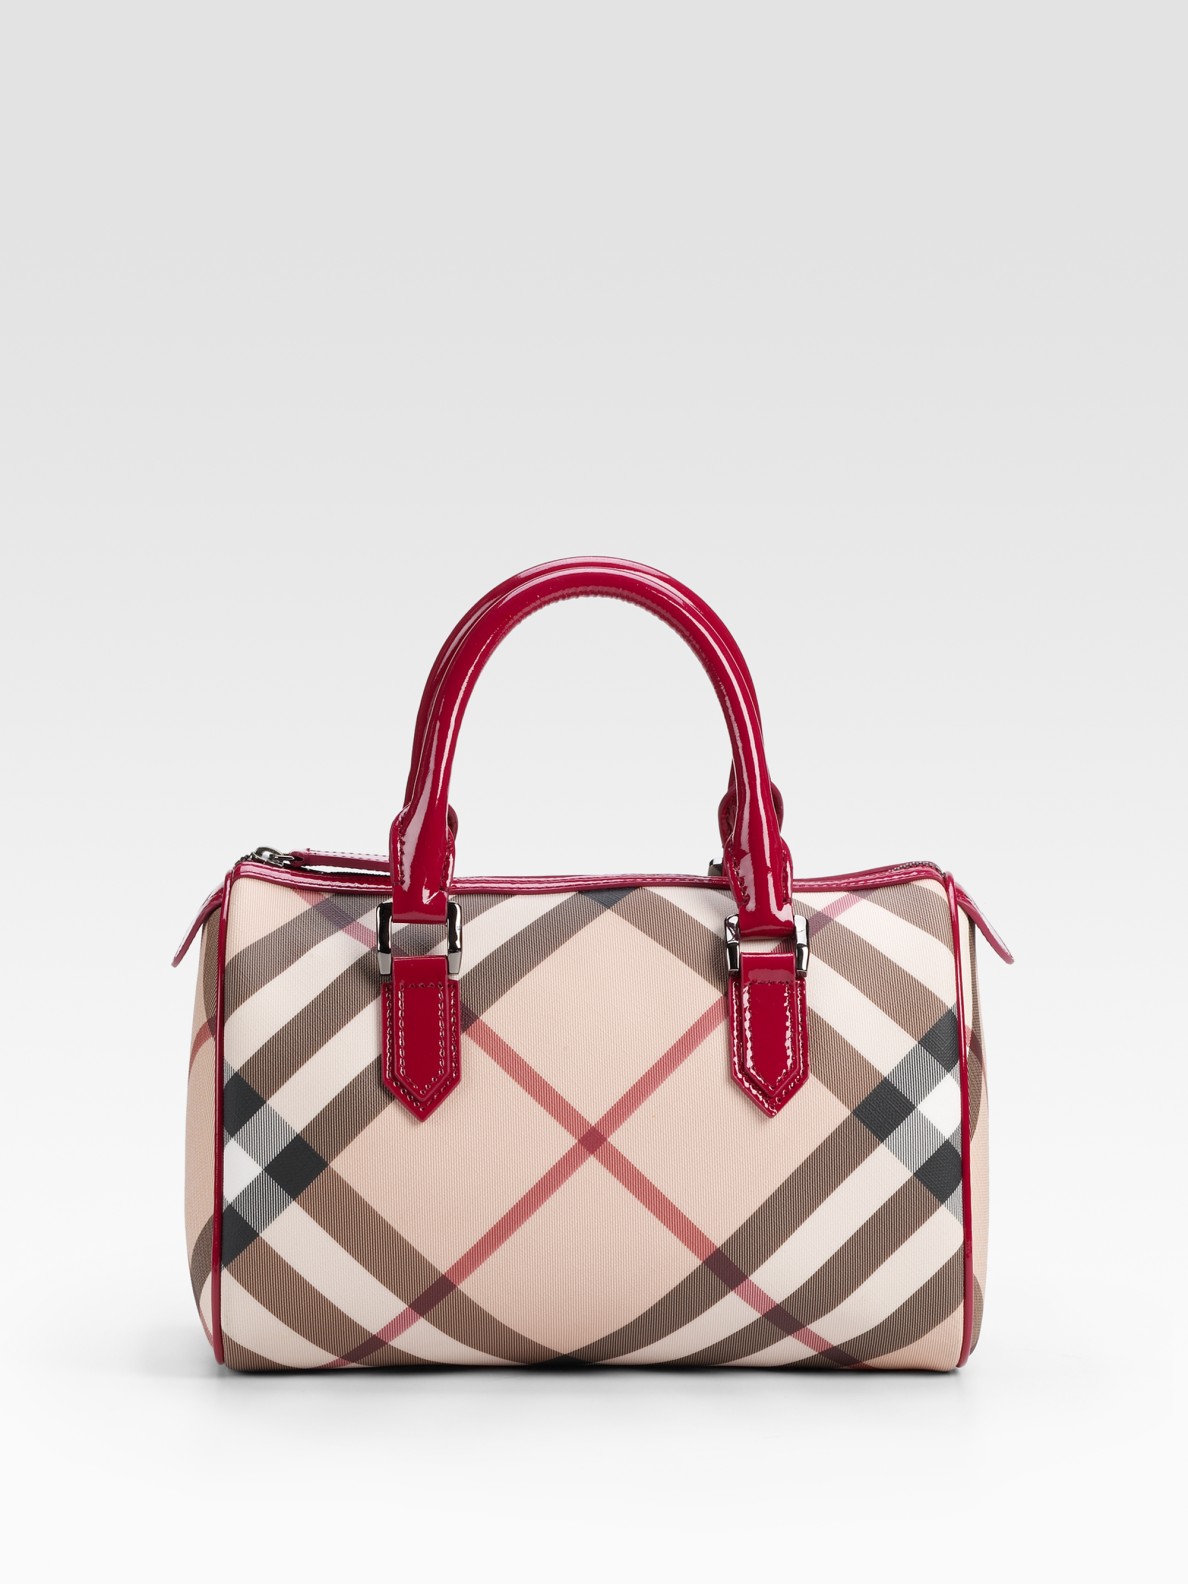 Burberry Check Top Handle Bag in 